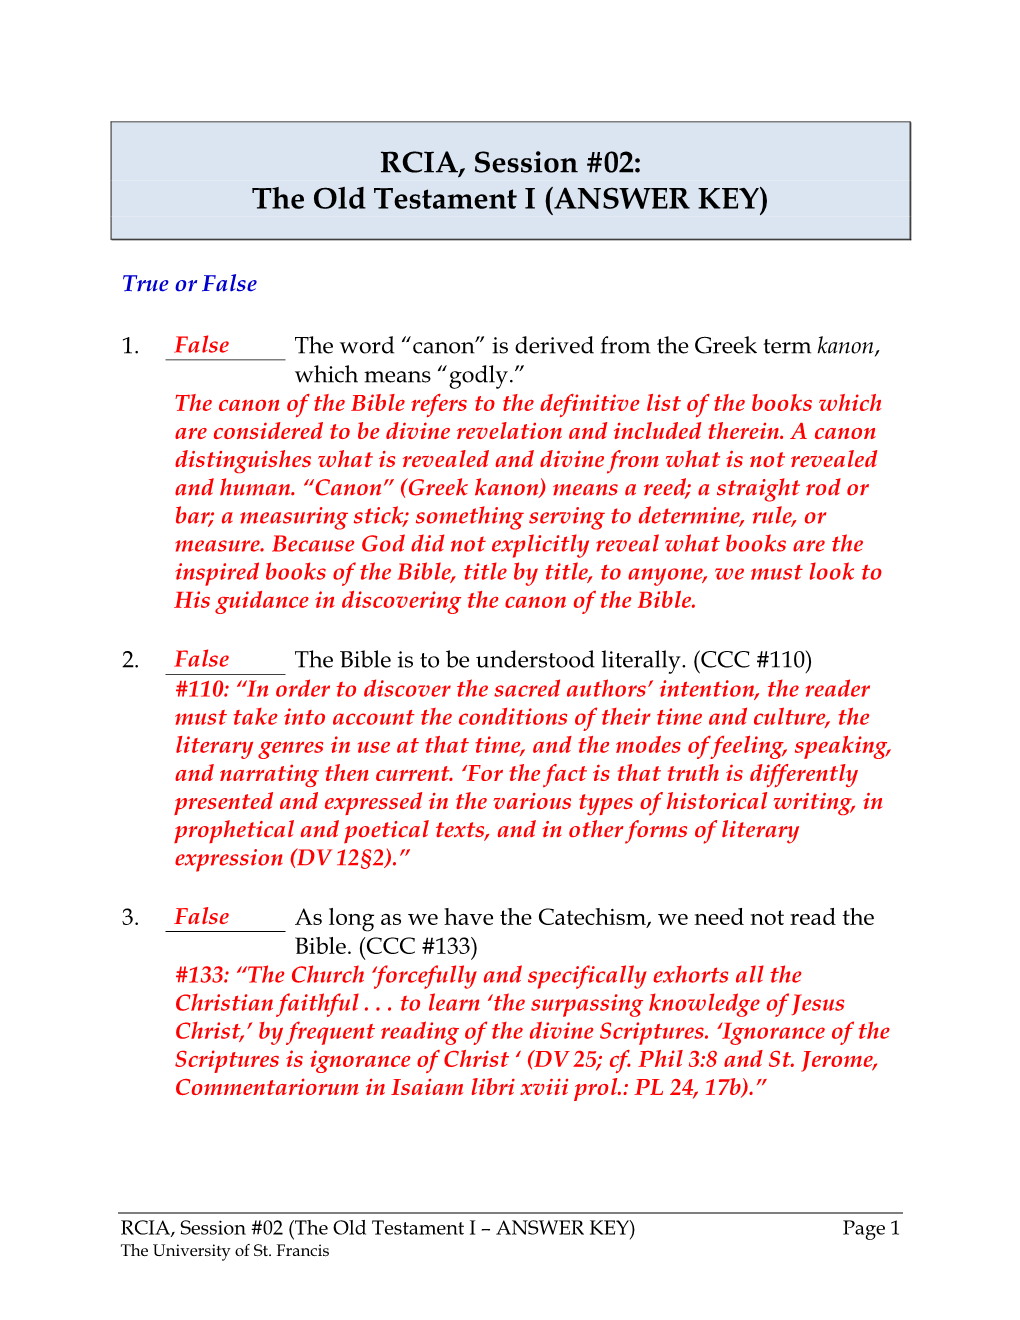 RCIA, Session #02: the Old Testament I (ANSWER KEY)